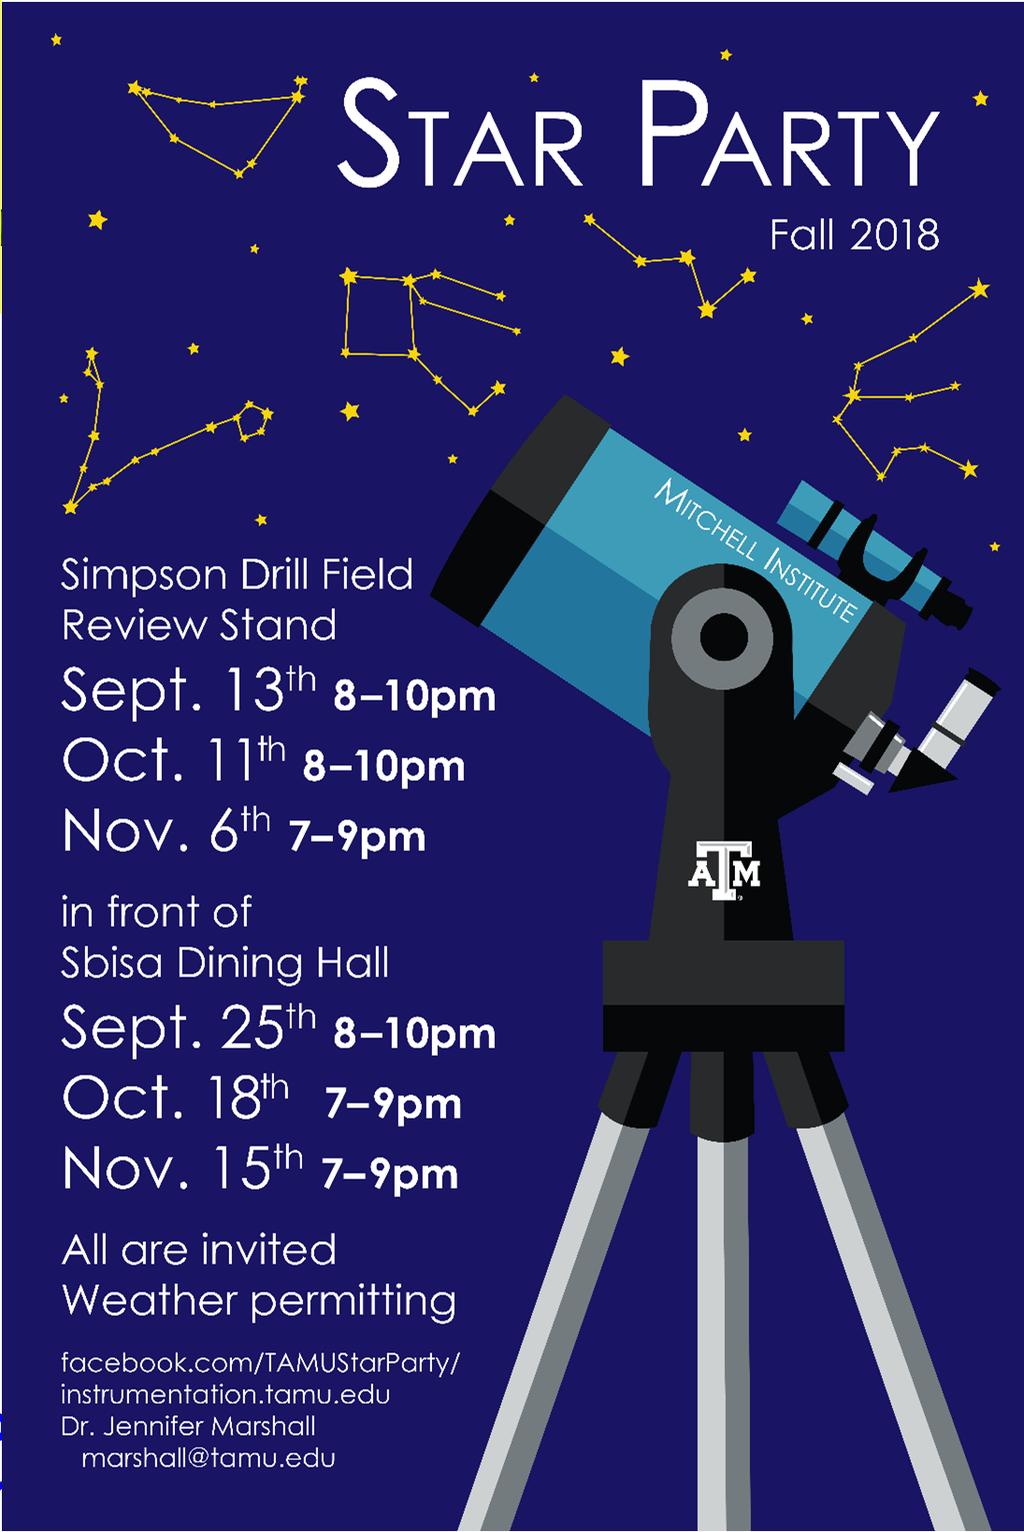 TAMU Star Party Great opportunity to meet astronomers and their